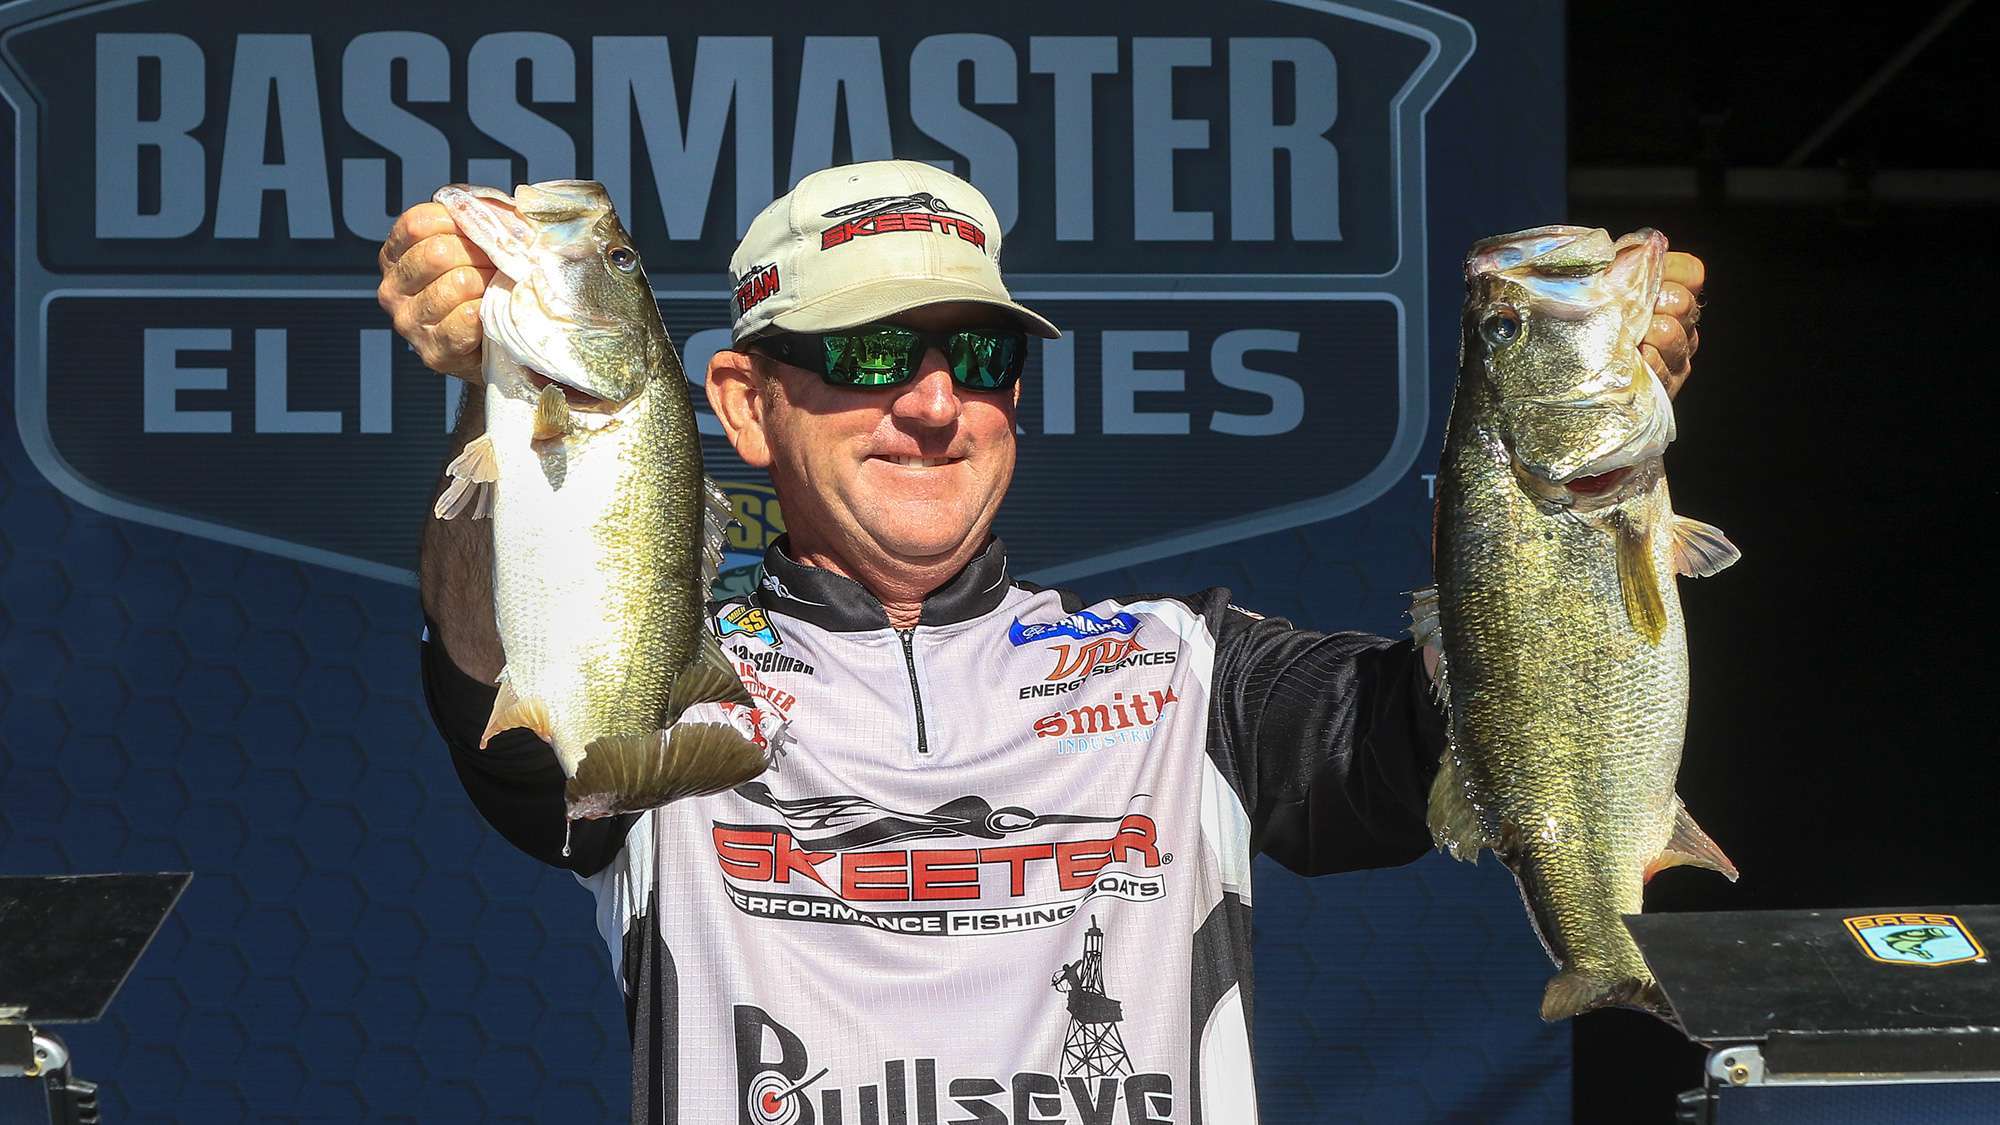 Texan Ray Hanselman was in a similar situation, scoring a Top 10 start with 22-0. He fished in Banana Cove with Schmitt and about 30 others the first two days, bringing in 17-4 then 18-13 to lead heading into the final day. His 13-7 left him third with 71-8.